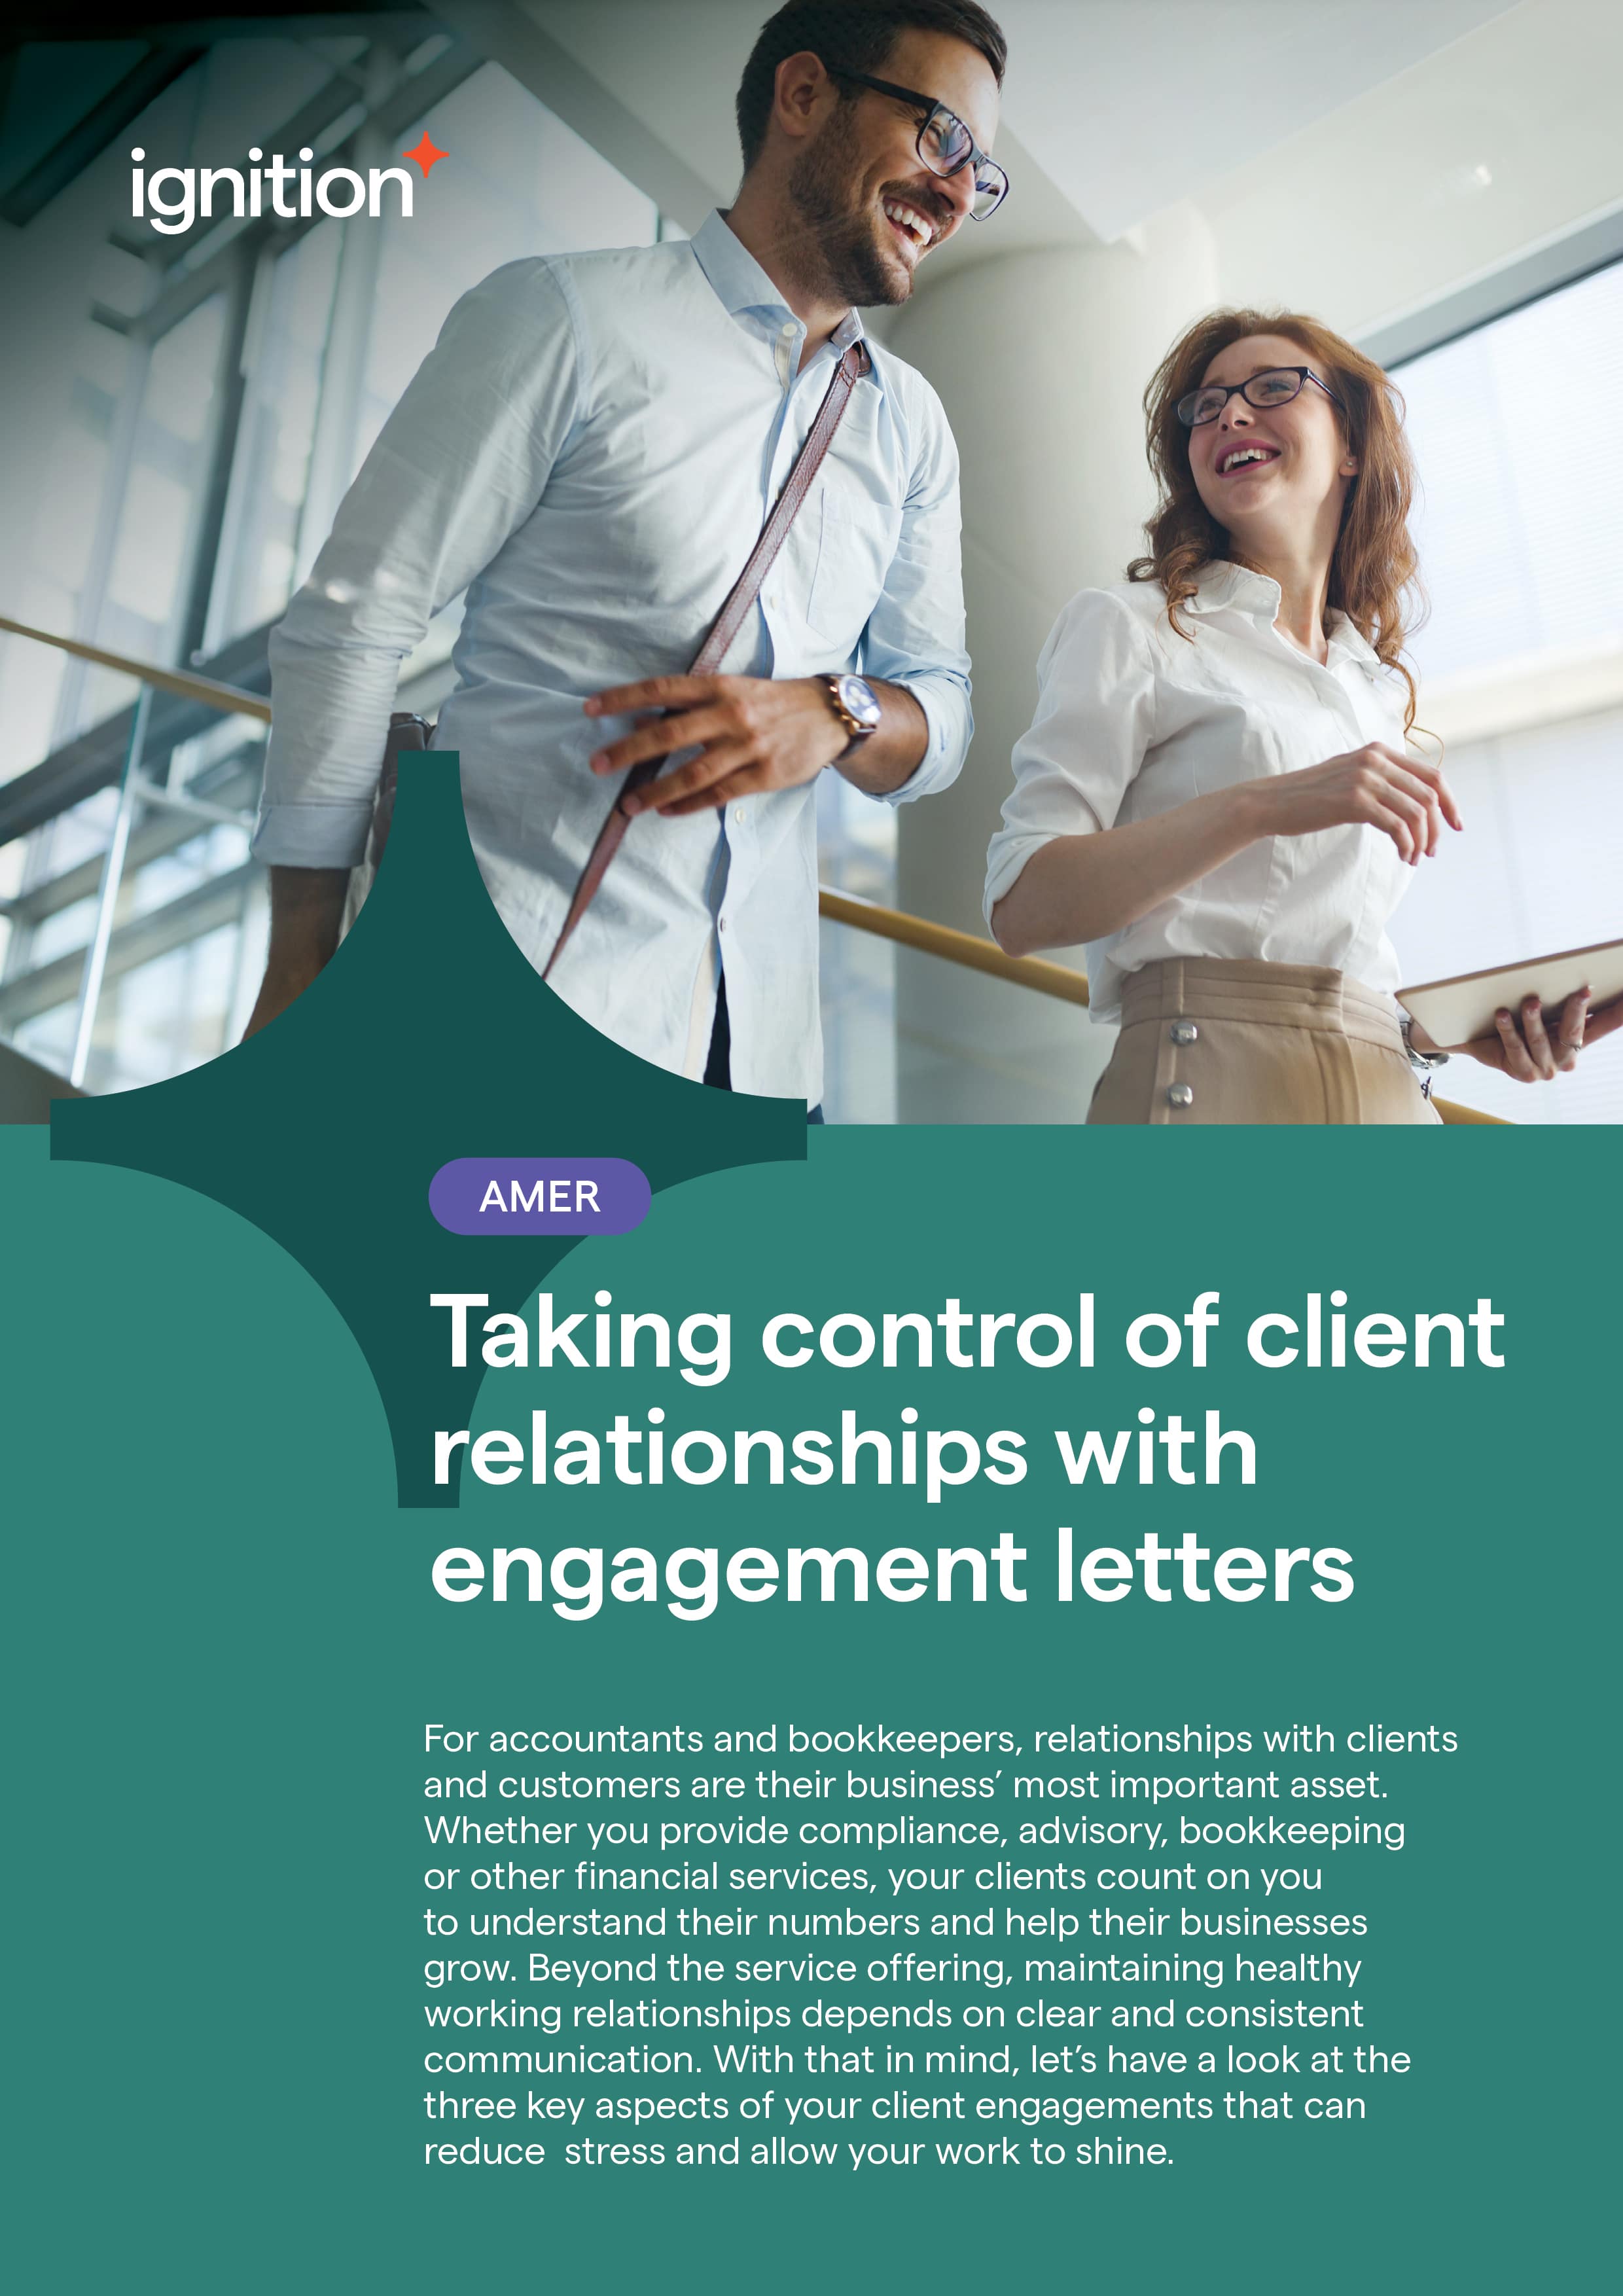 2204-AMER-Content-TakingControlofClientRelationships-A4-Cover-min